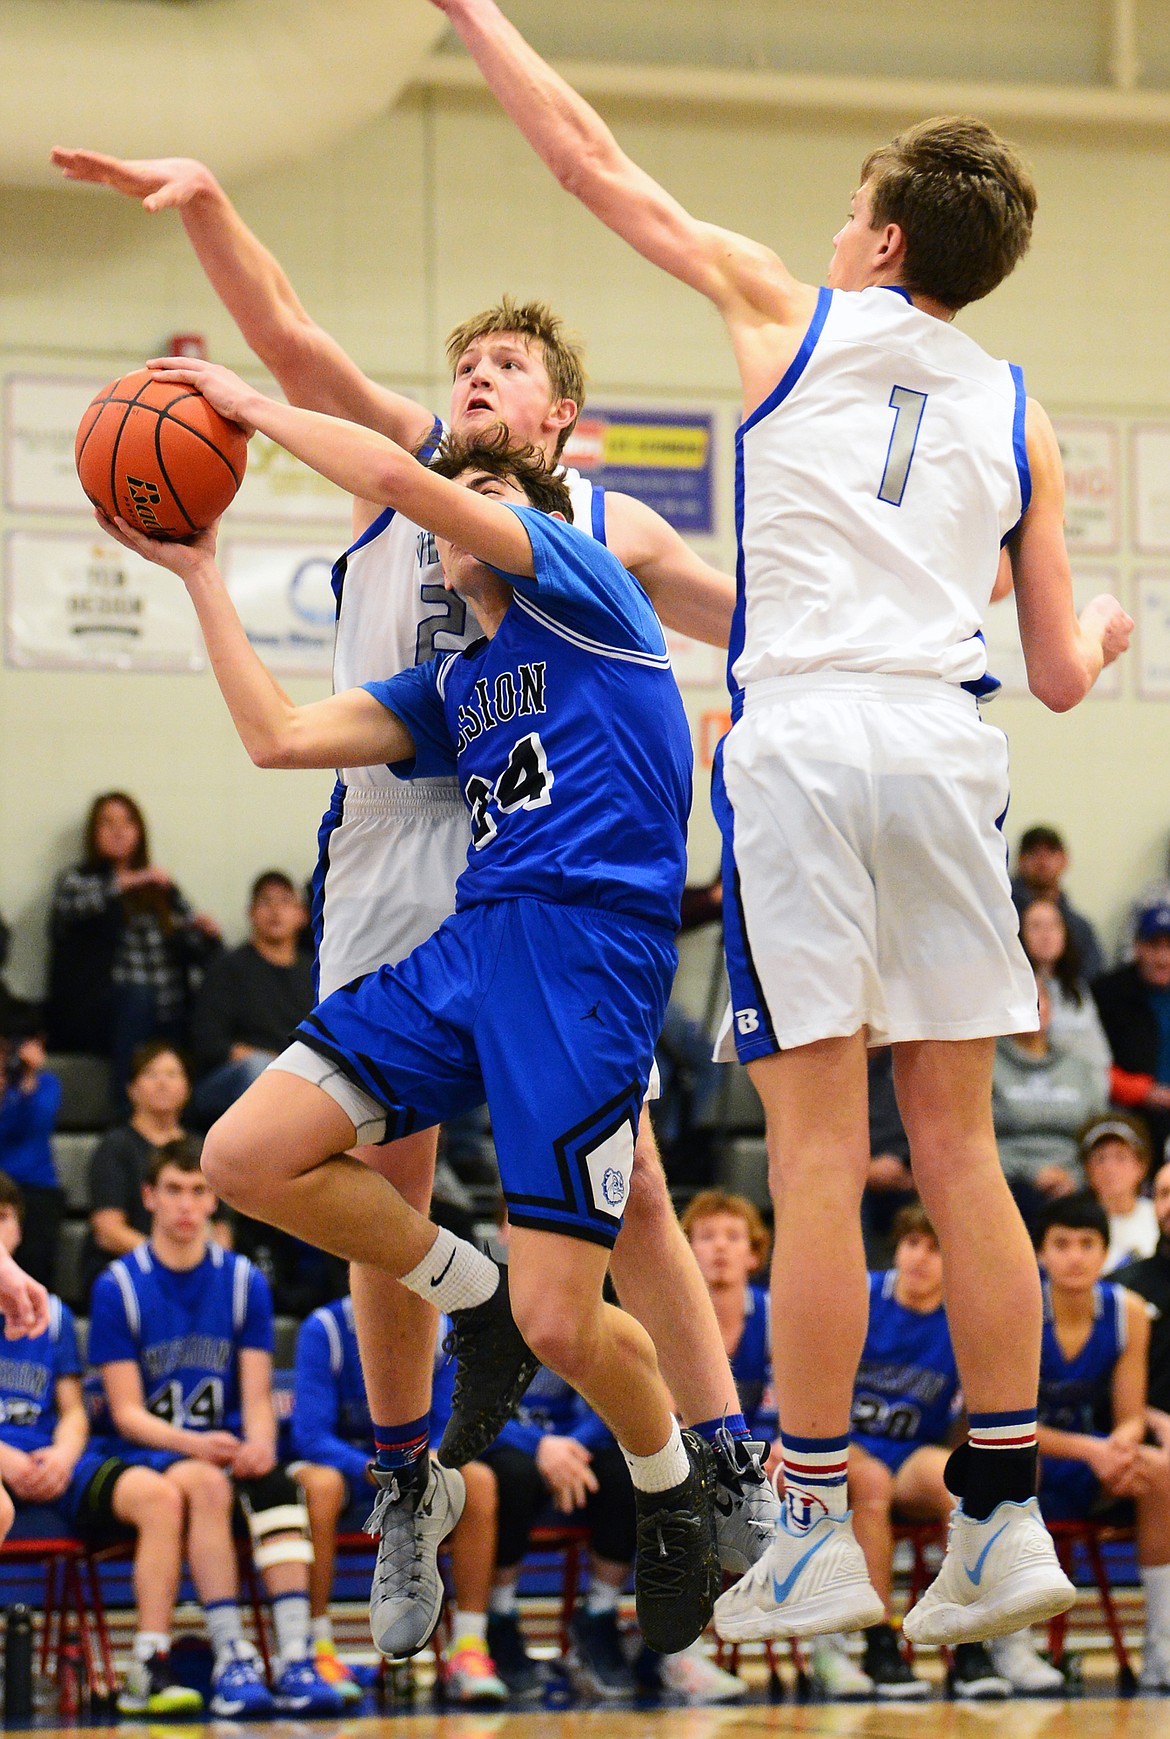 Mission’s Jedi Christy (24) drives to the basket against Bigfork’s Isaac Bjorge (23) and Colt Thorness (1) at Bigfork High School on Thursday. (Casey Kreider/Daily Inter Lake)